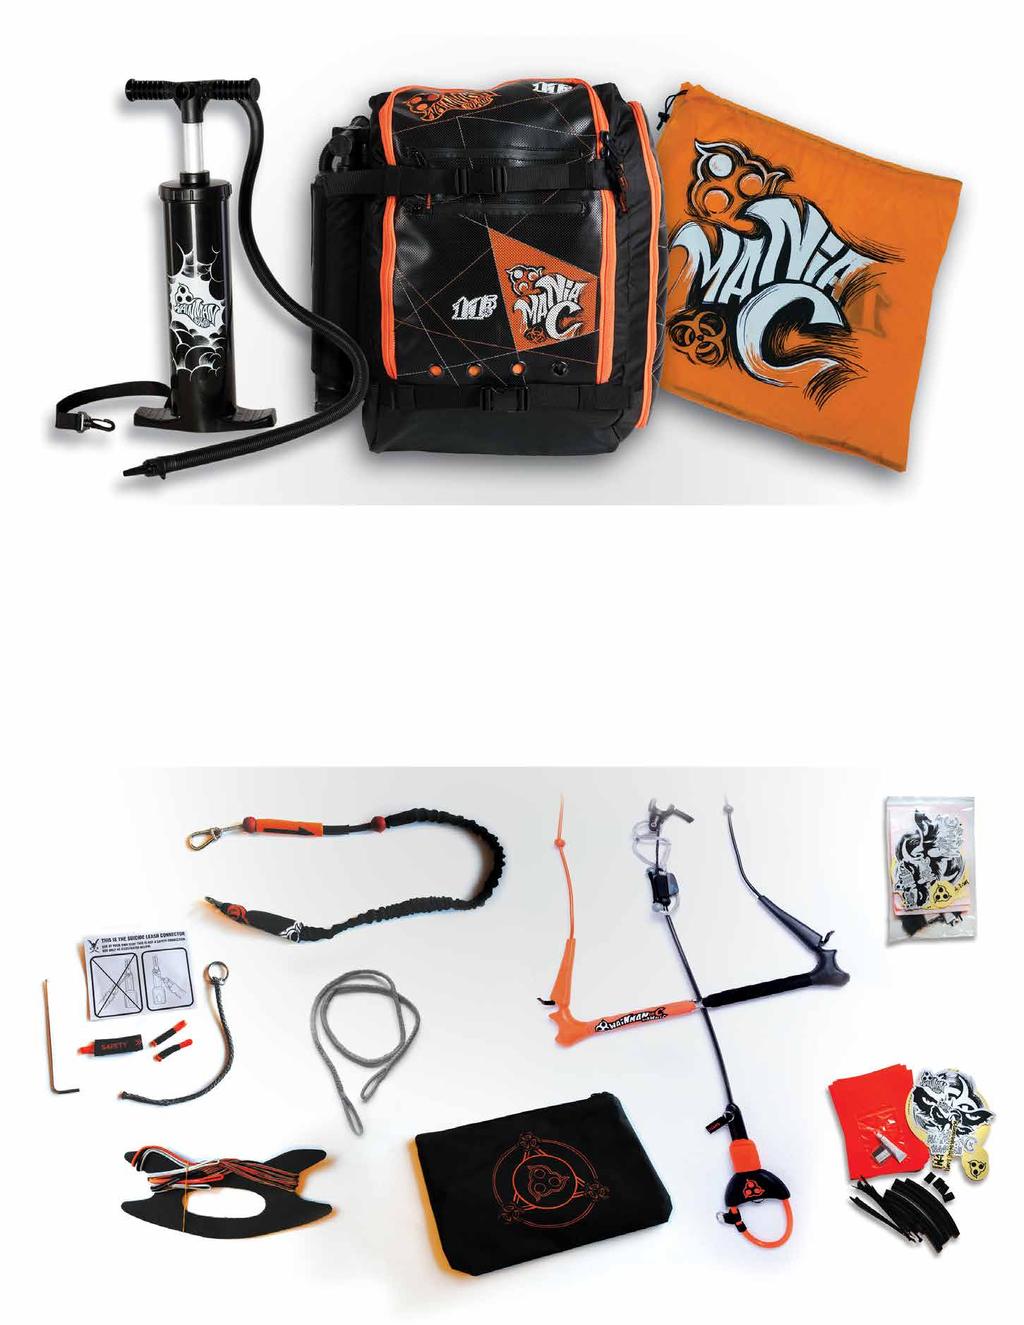 Inside the Package 2. 1. 3. 1. Kite (Inside the Bag) 2. Pump (Left Pouch) 3. Compression Bag 4. ManiaC Bar (Right Pouch) 5. Safety Leash 6. dditional Lines and Line winder/storage 7.